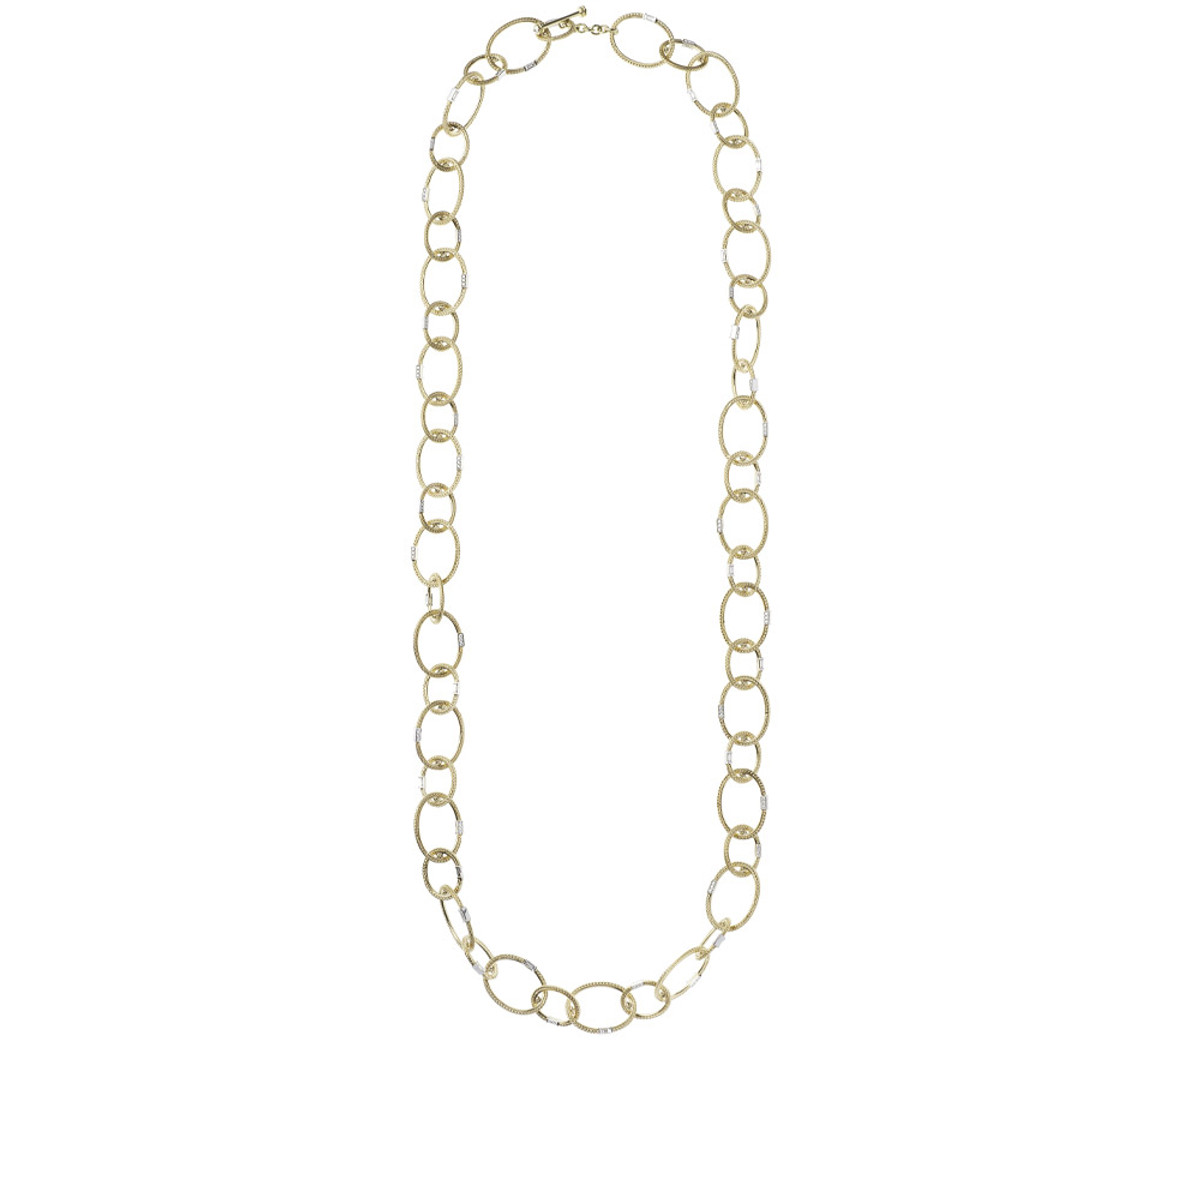 Nikos Koulis 18K White and Yellow Gold Together Chain Link Diamond Necklace-58413 Product Image